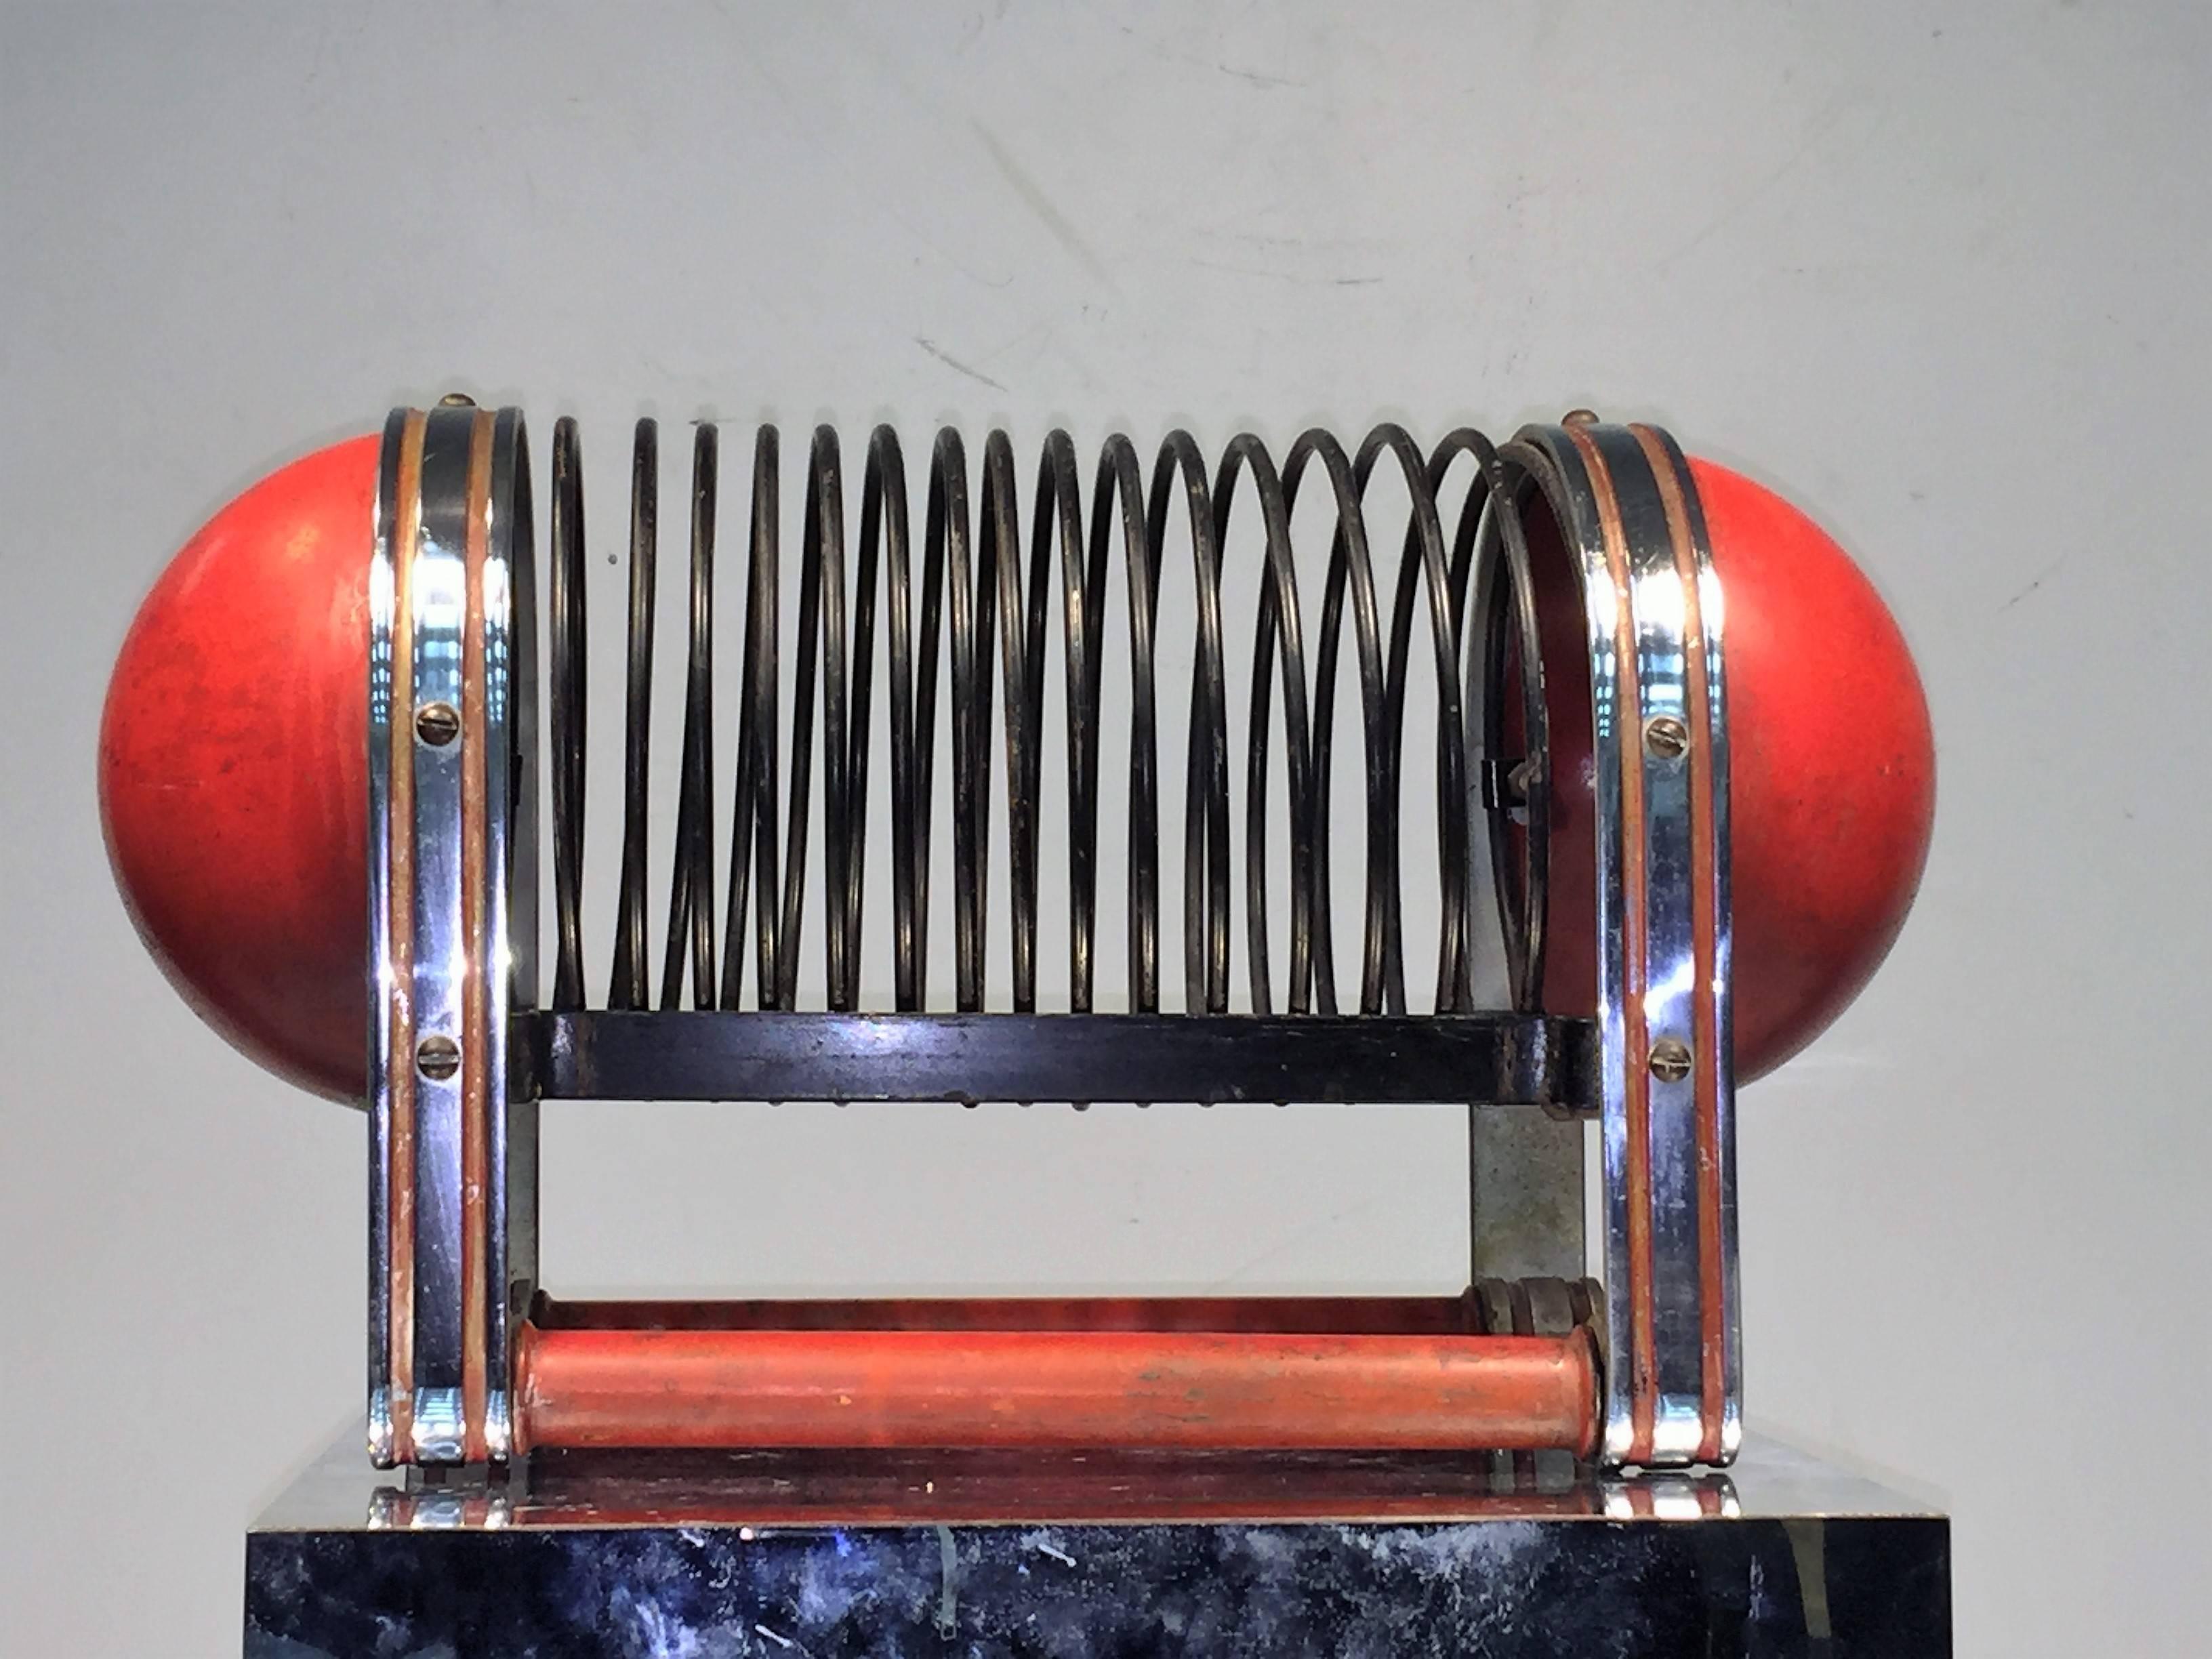 Incredible original red modernist black and chrome coil form magazine rack designed in 1929. Both an Interesting sculpture as well as a functional magazine holder this is really an unusual piece.